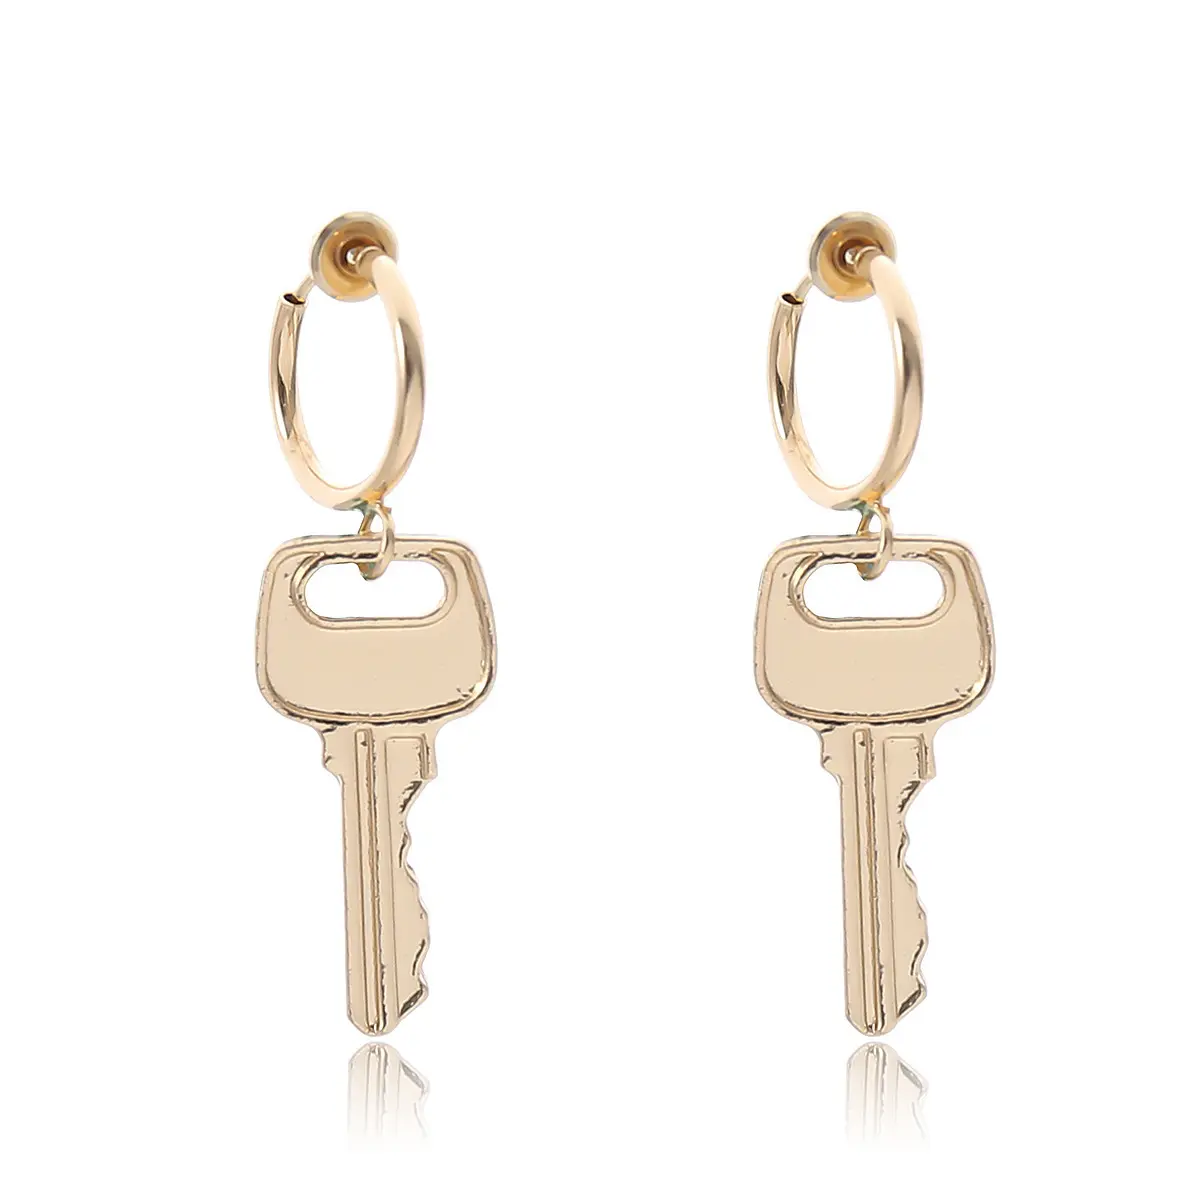 YIZAN B01905 the new symbol of key earring jewelry that opens the door of friends and loved ones